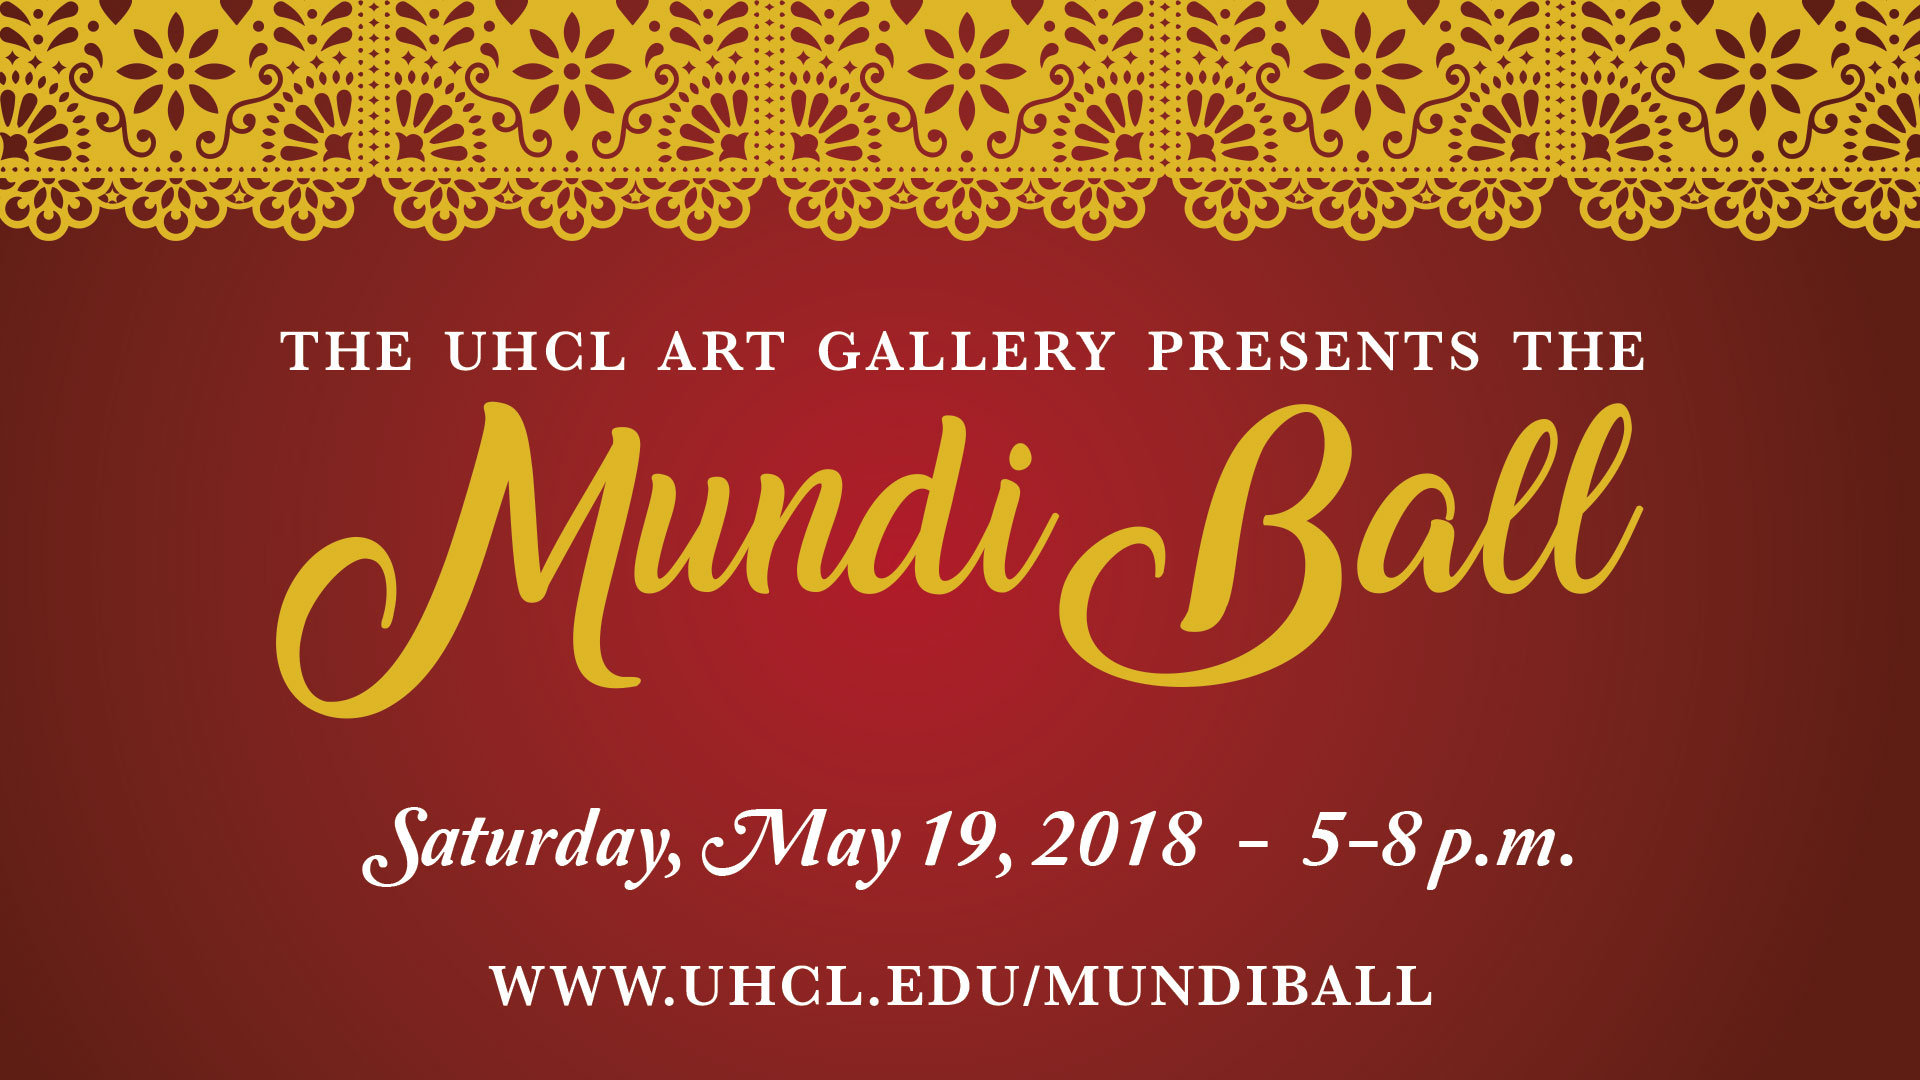 UHCL Art Gallery to host Mundi Ball on May 19 from 5-8 p.m. Photo courtesy of the UHCL Art Gallery.